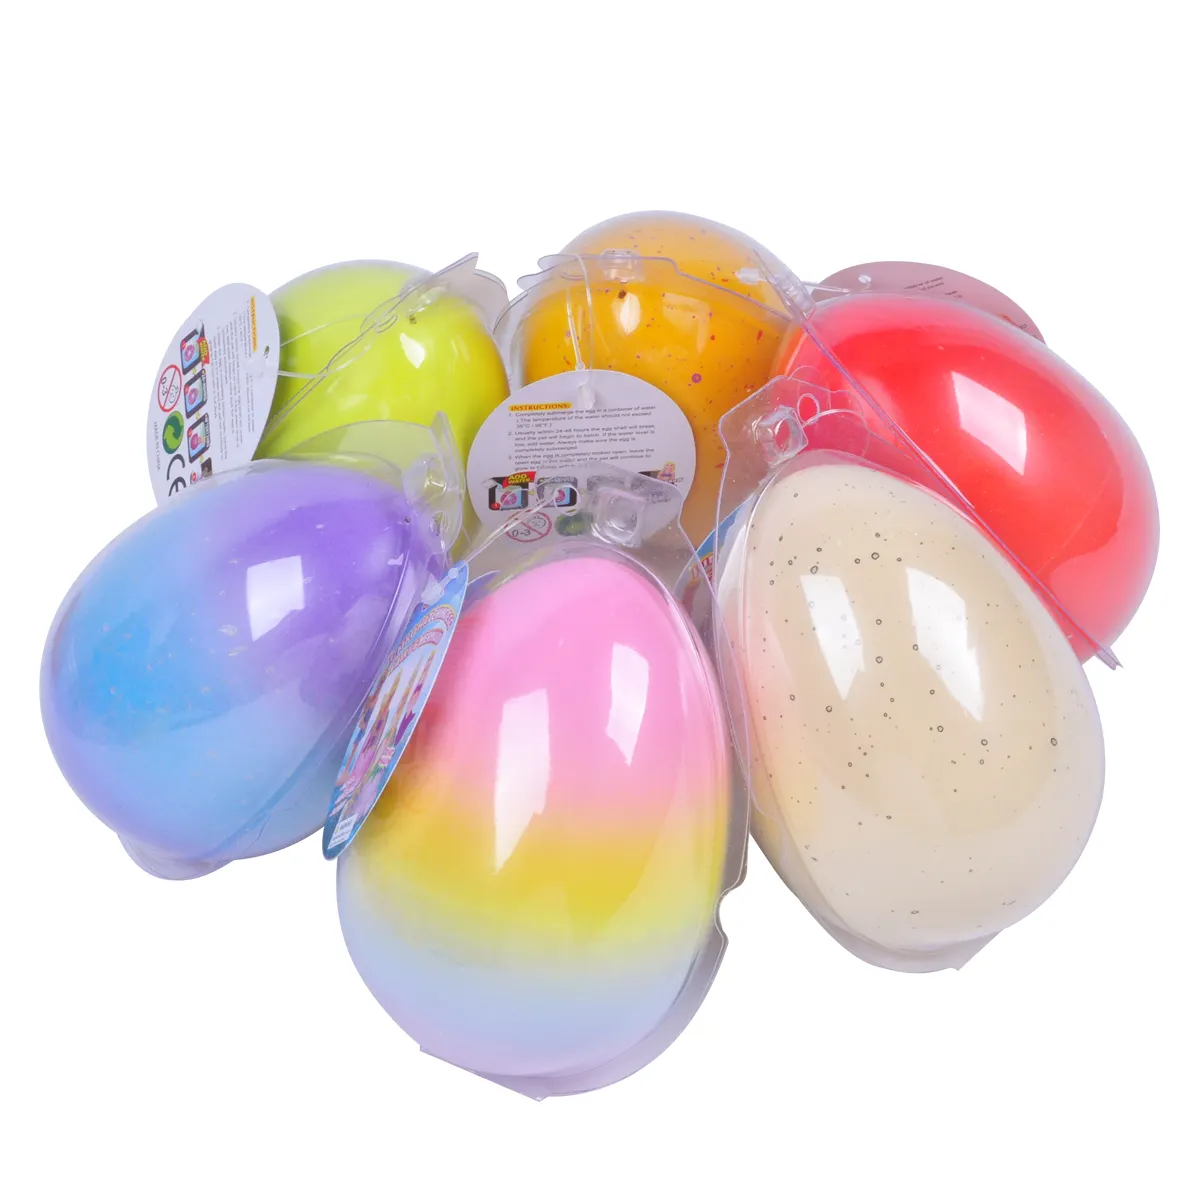 Party Supplies Favors Fun Stocking Stuffers for Kids Growing Big Flamingos Egg Water Growing Animal Egg Easter Egg Fillers